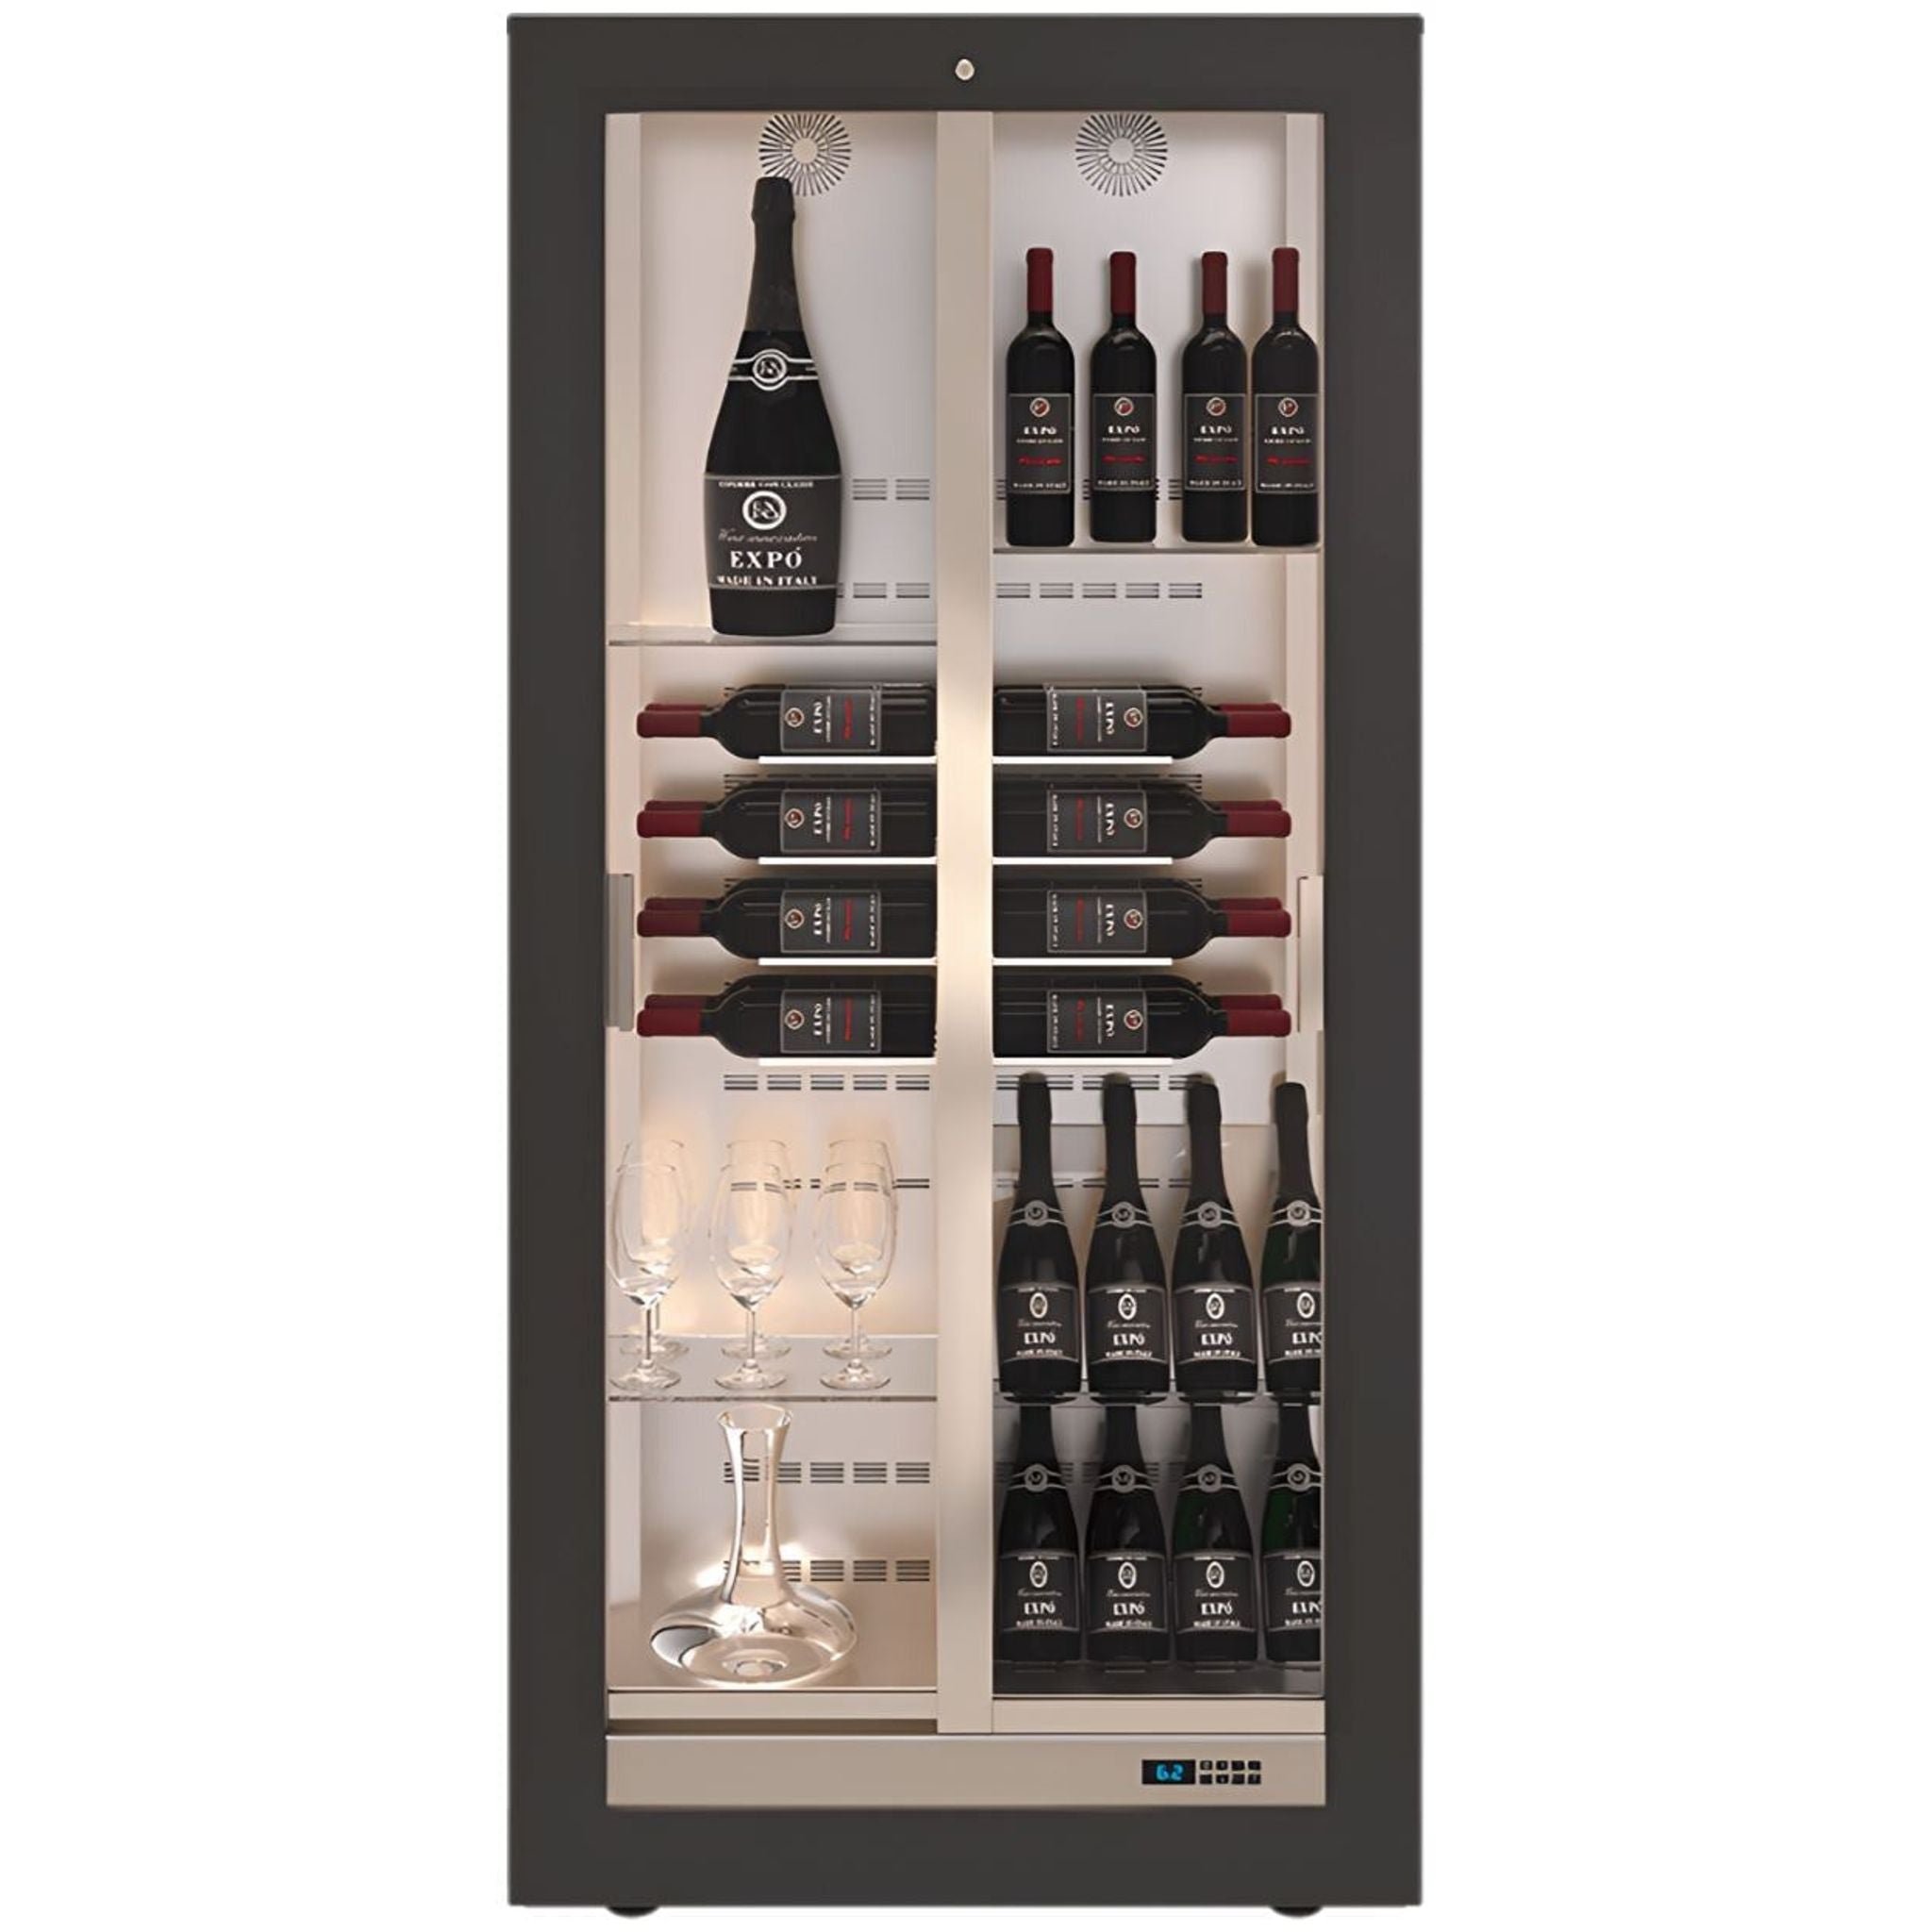 Teca B - Built in Wine Wall TE-B14 - Customisable Shelving - For Home Use